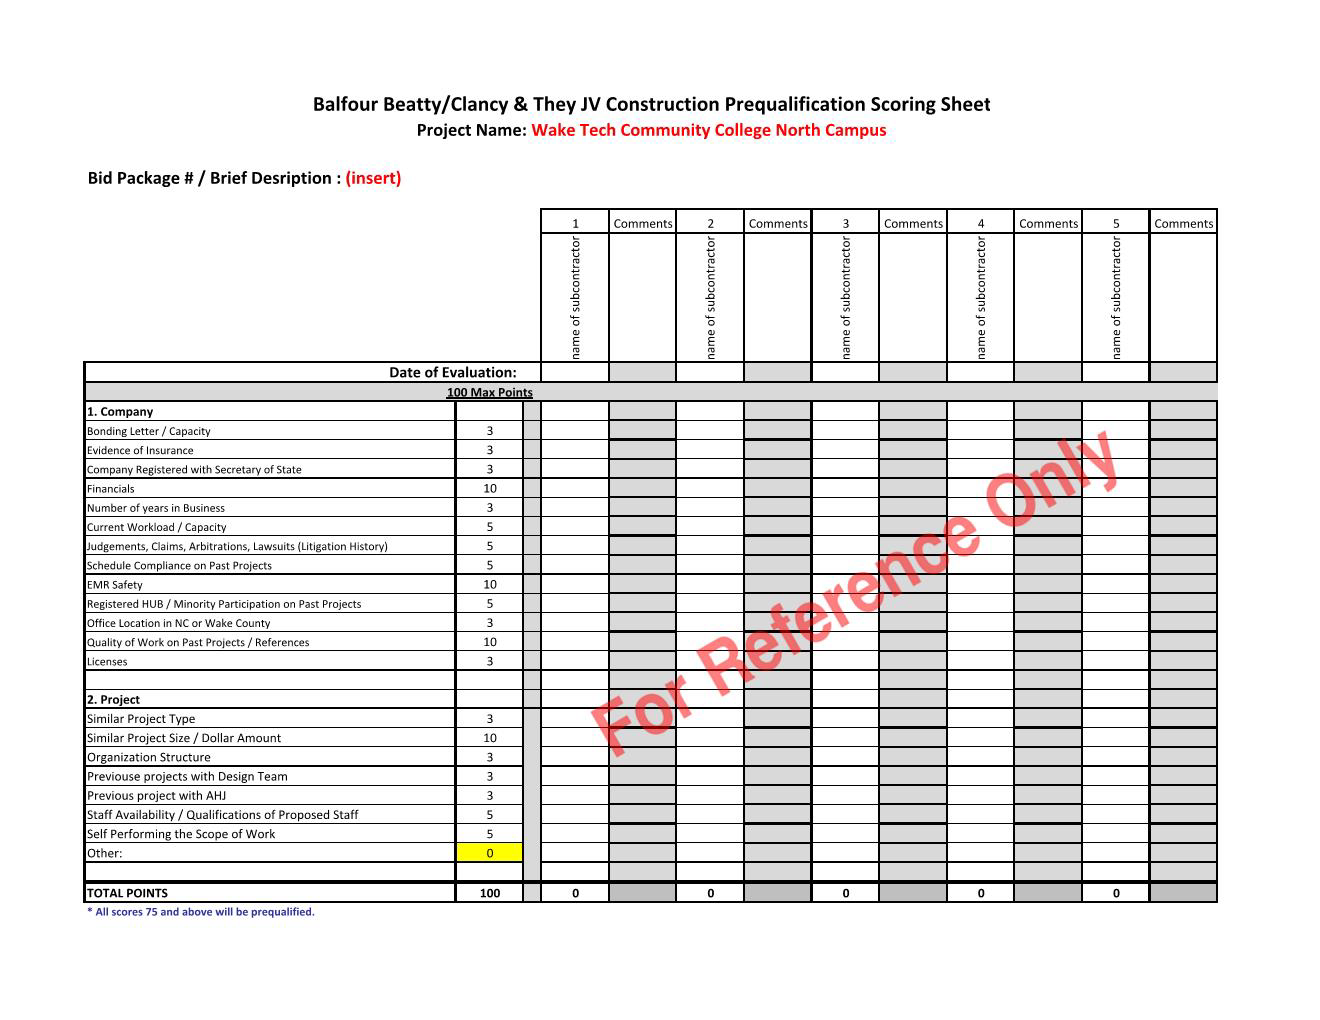 Attachment B Prequalification Scoring Sheet (FOR